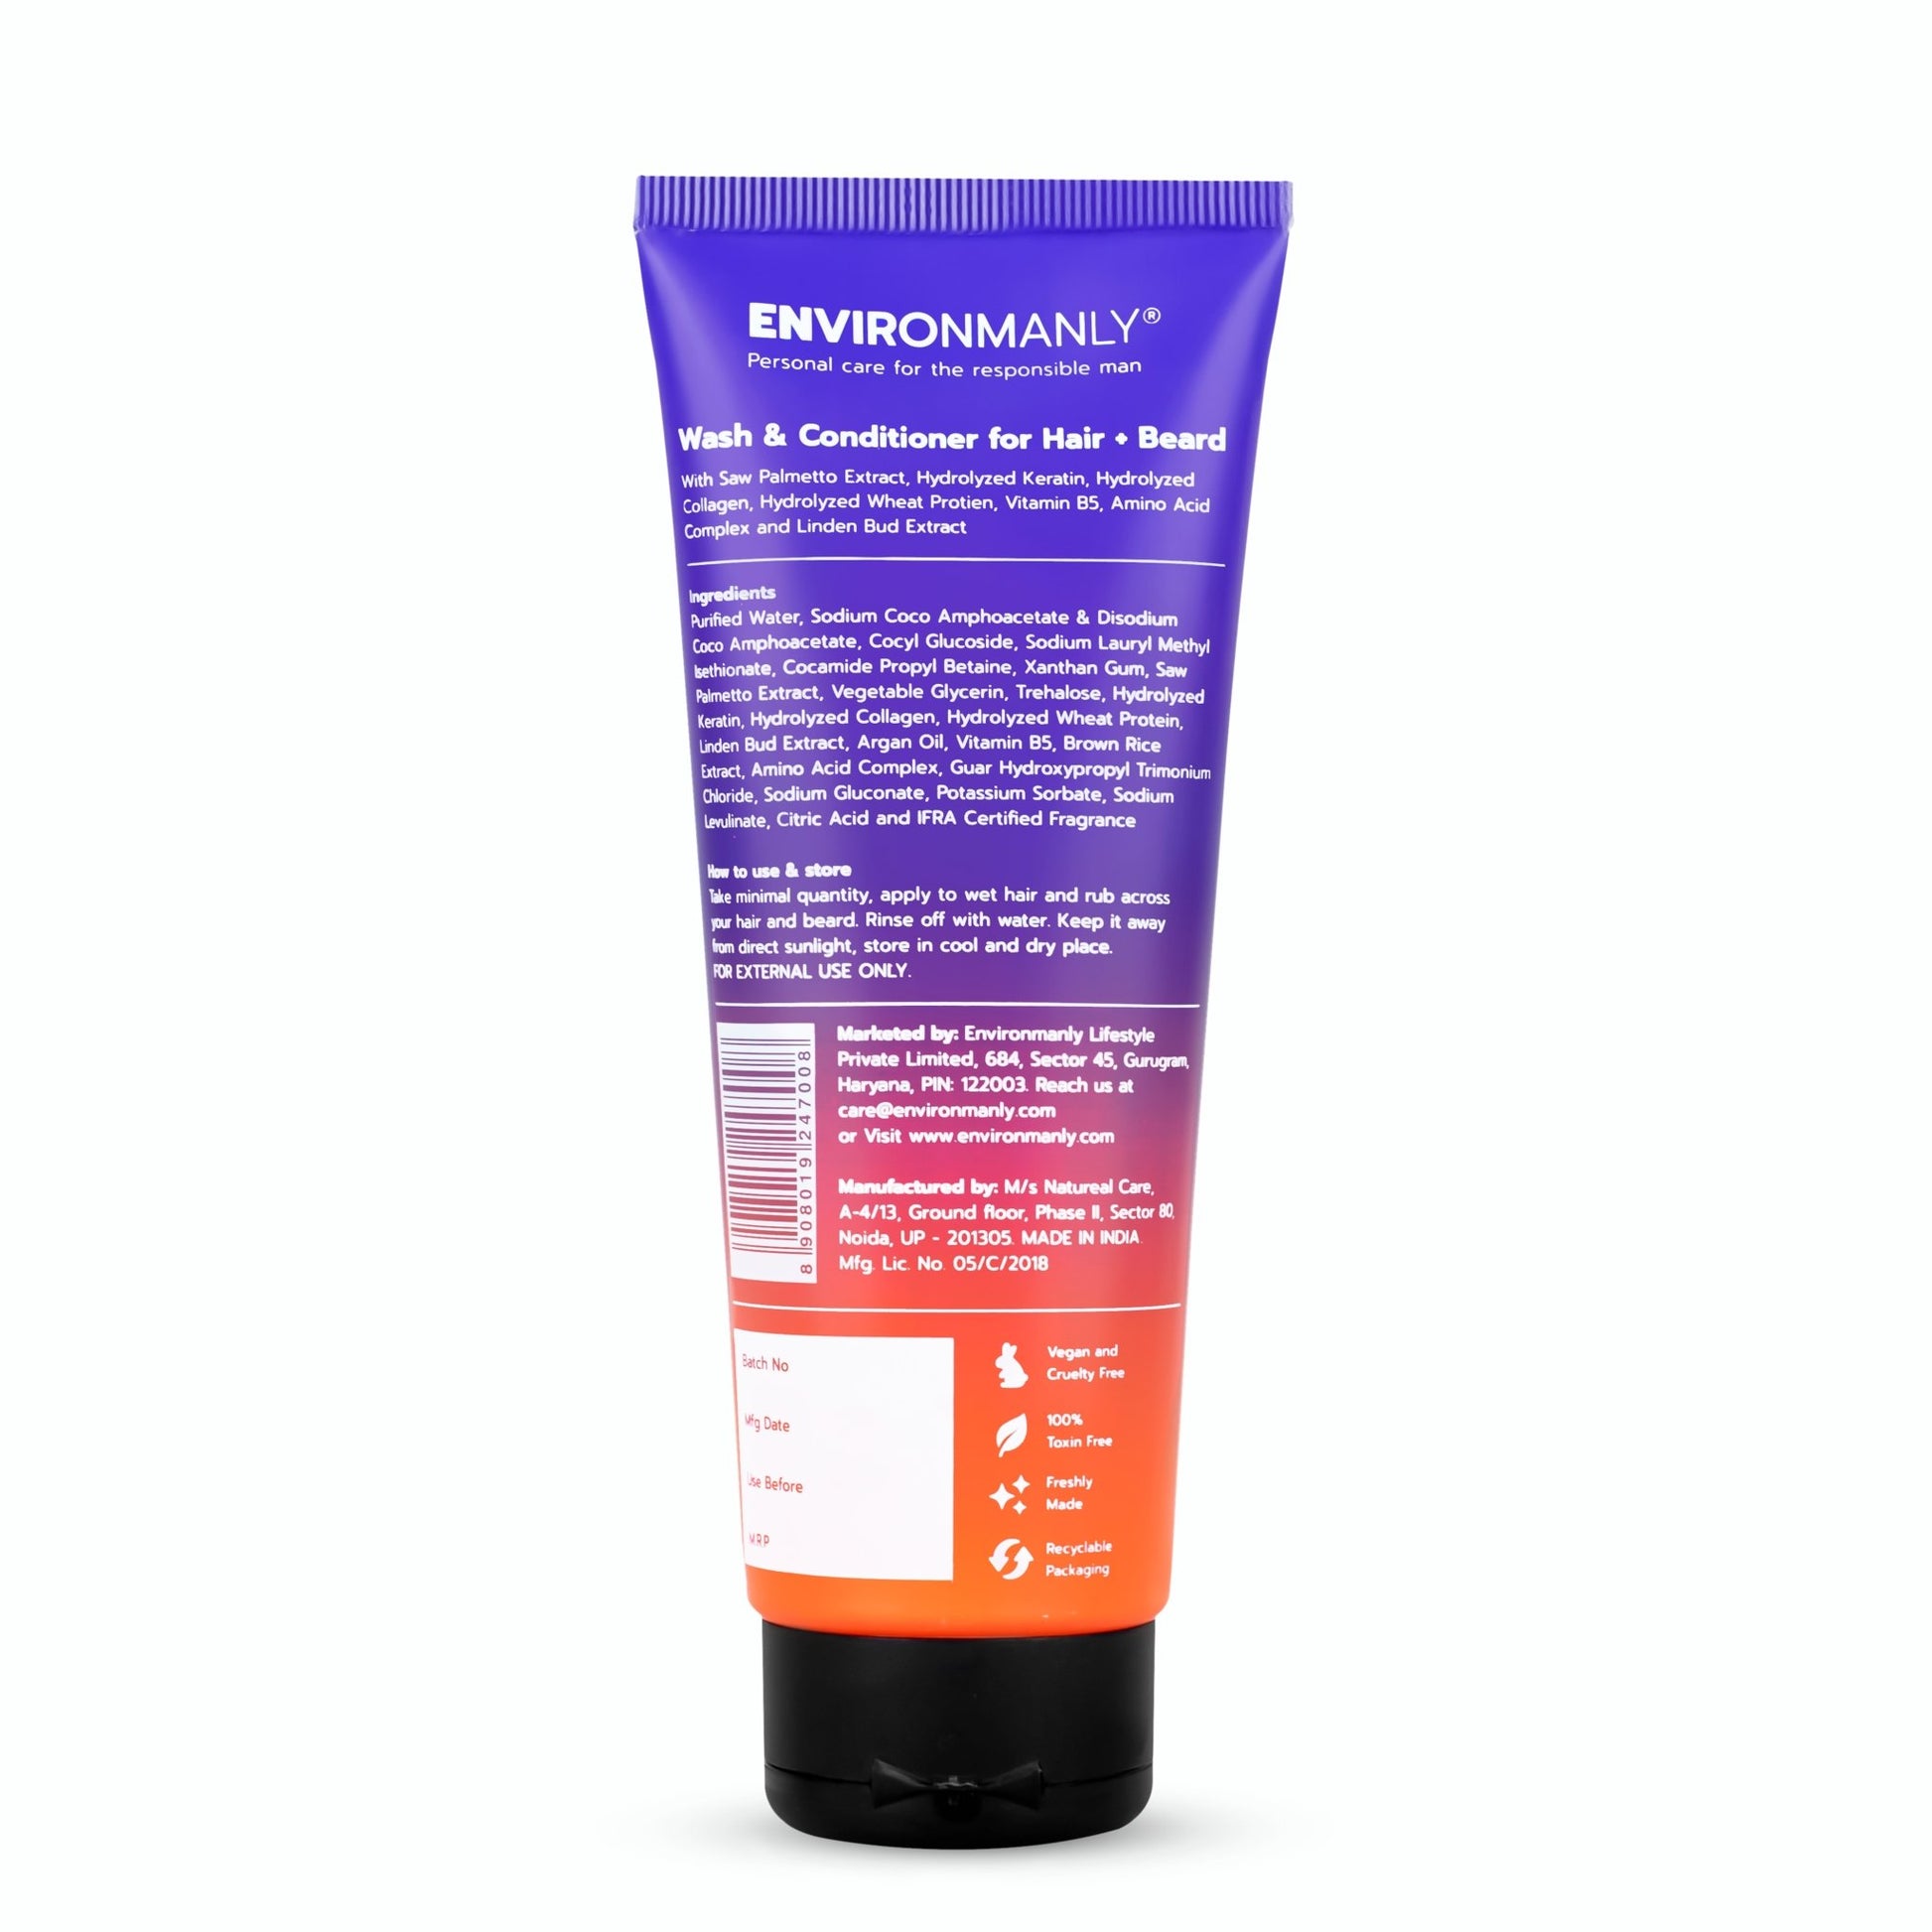 Hair & Beard Wash + Conditioner - Environmanly